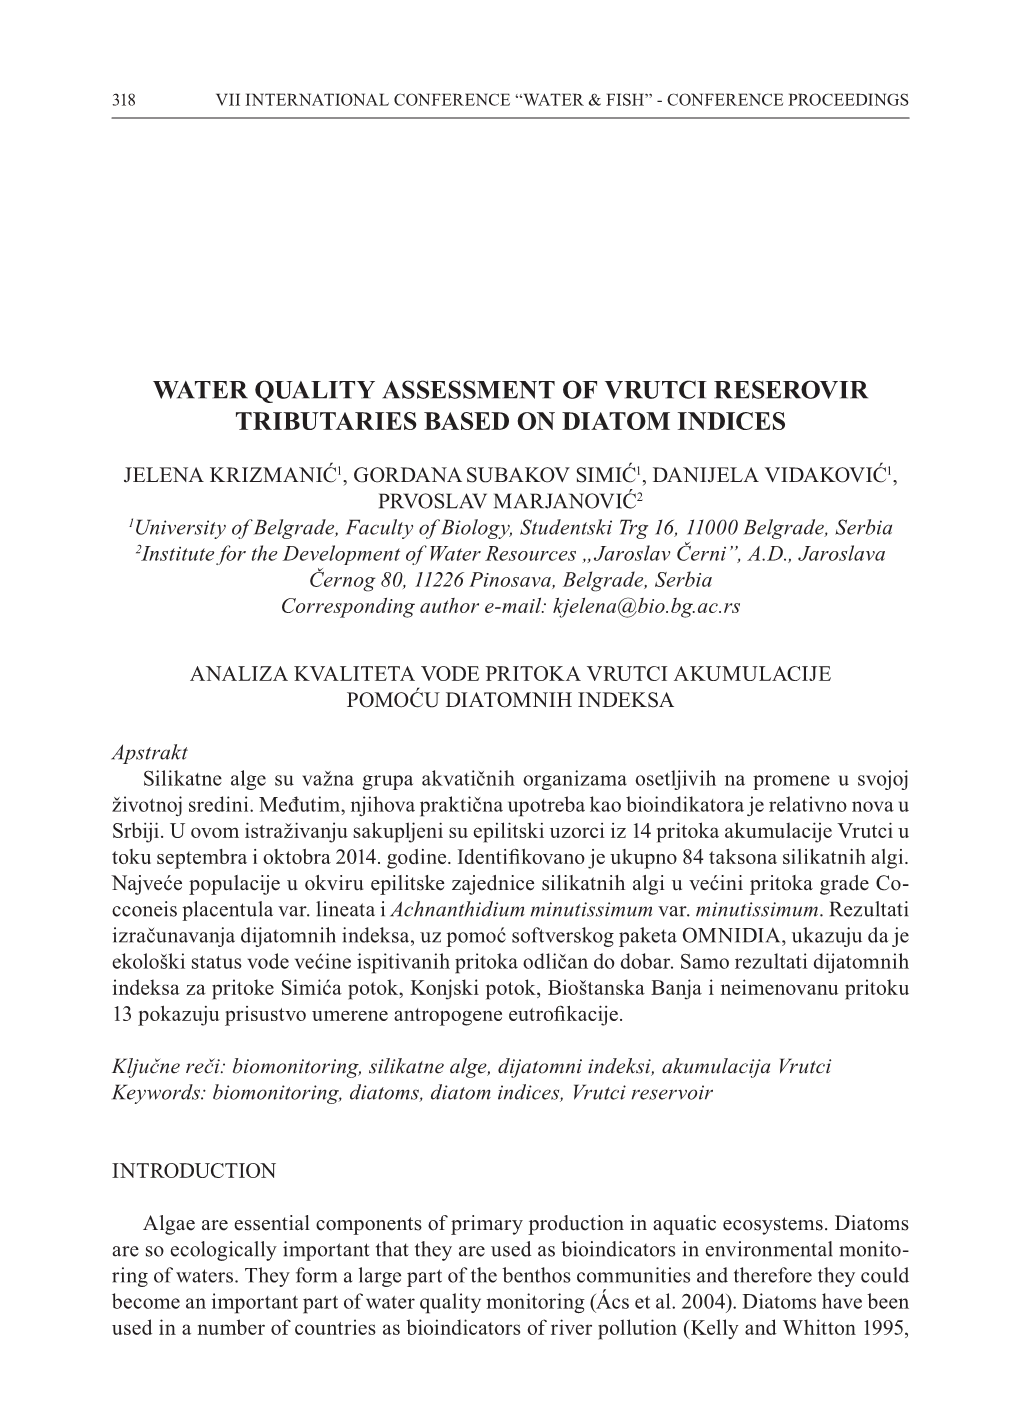 Water Quality Assessment of Vrutci RESEROVIR Tributaries Based on Diatom Indices